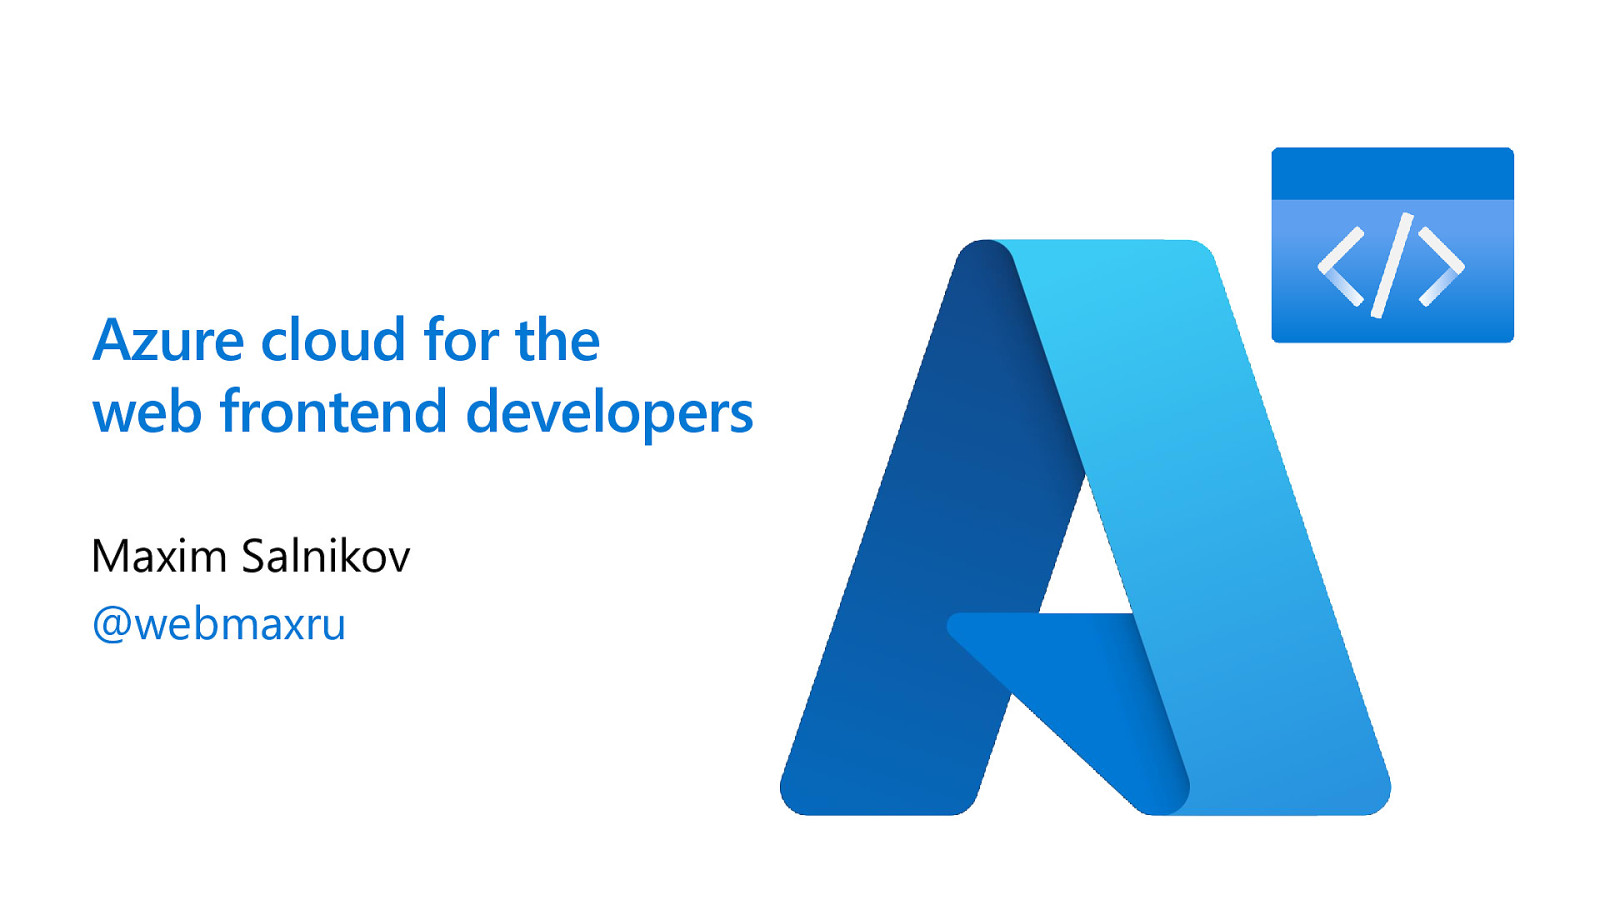 Azure cloud for the web frontend developers